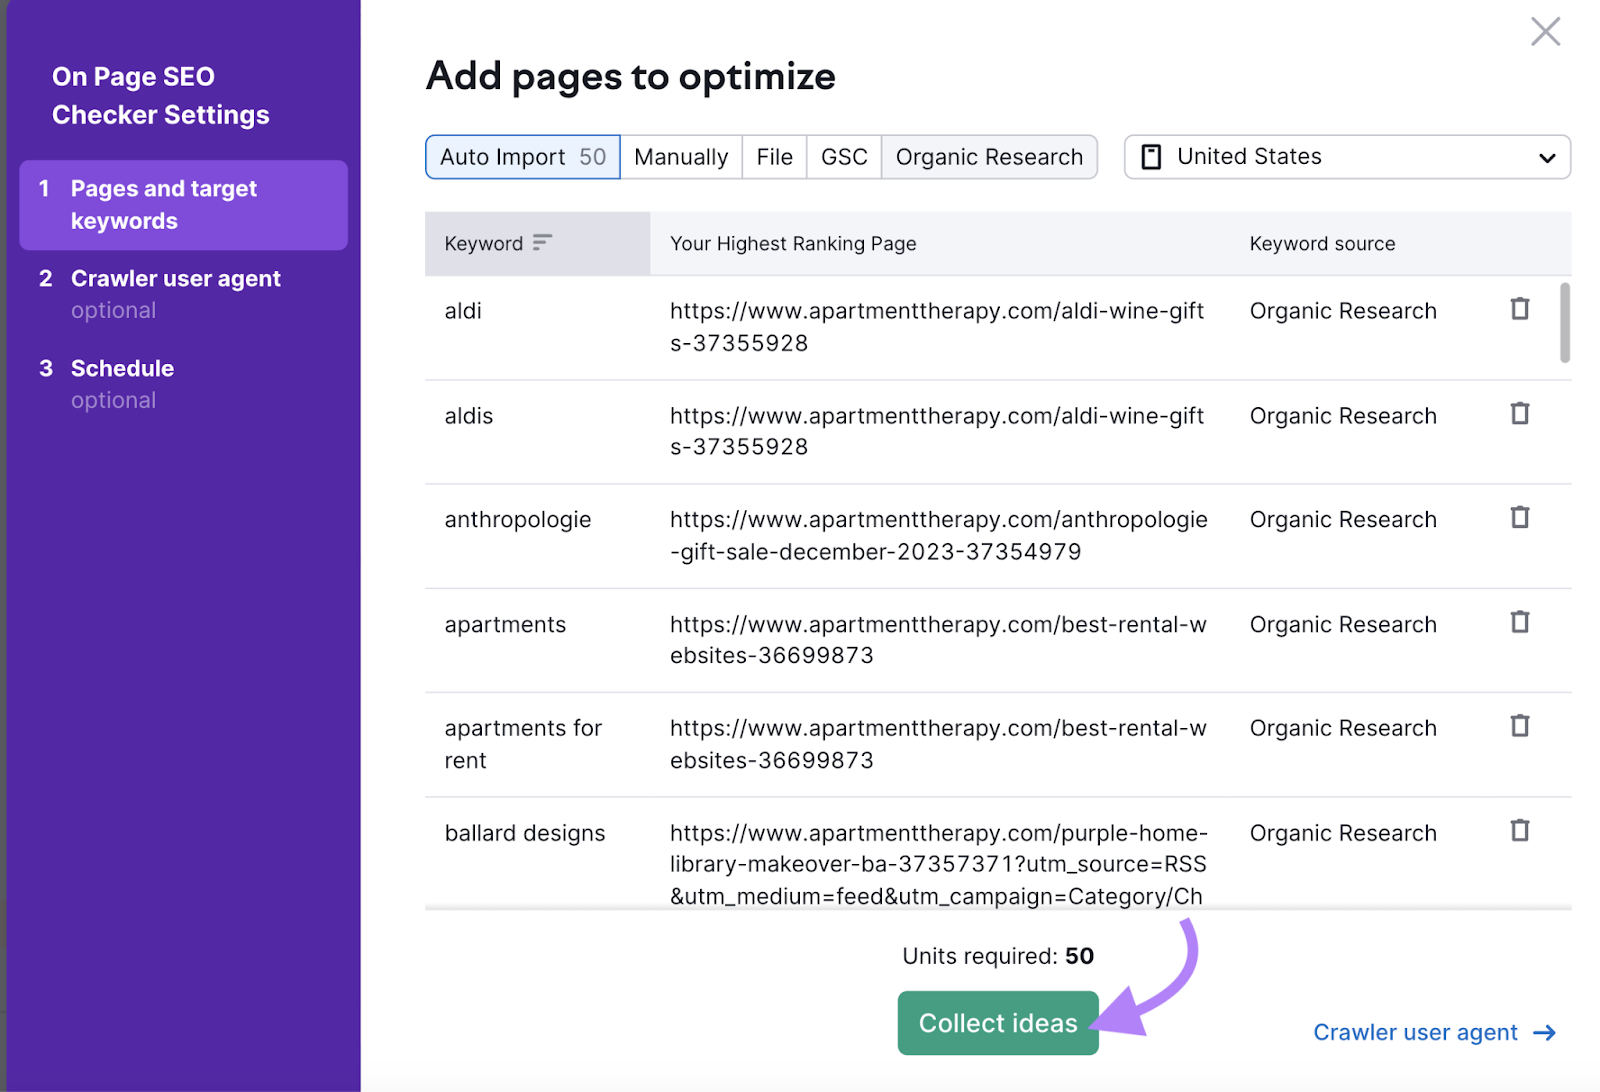 "Add pages to optimize" window in On Page SEO Checker settings